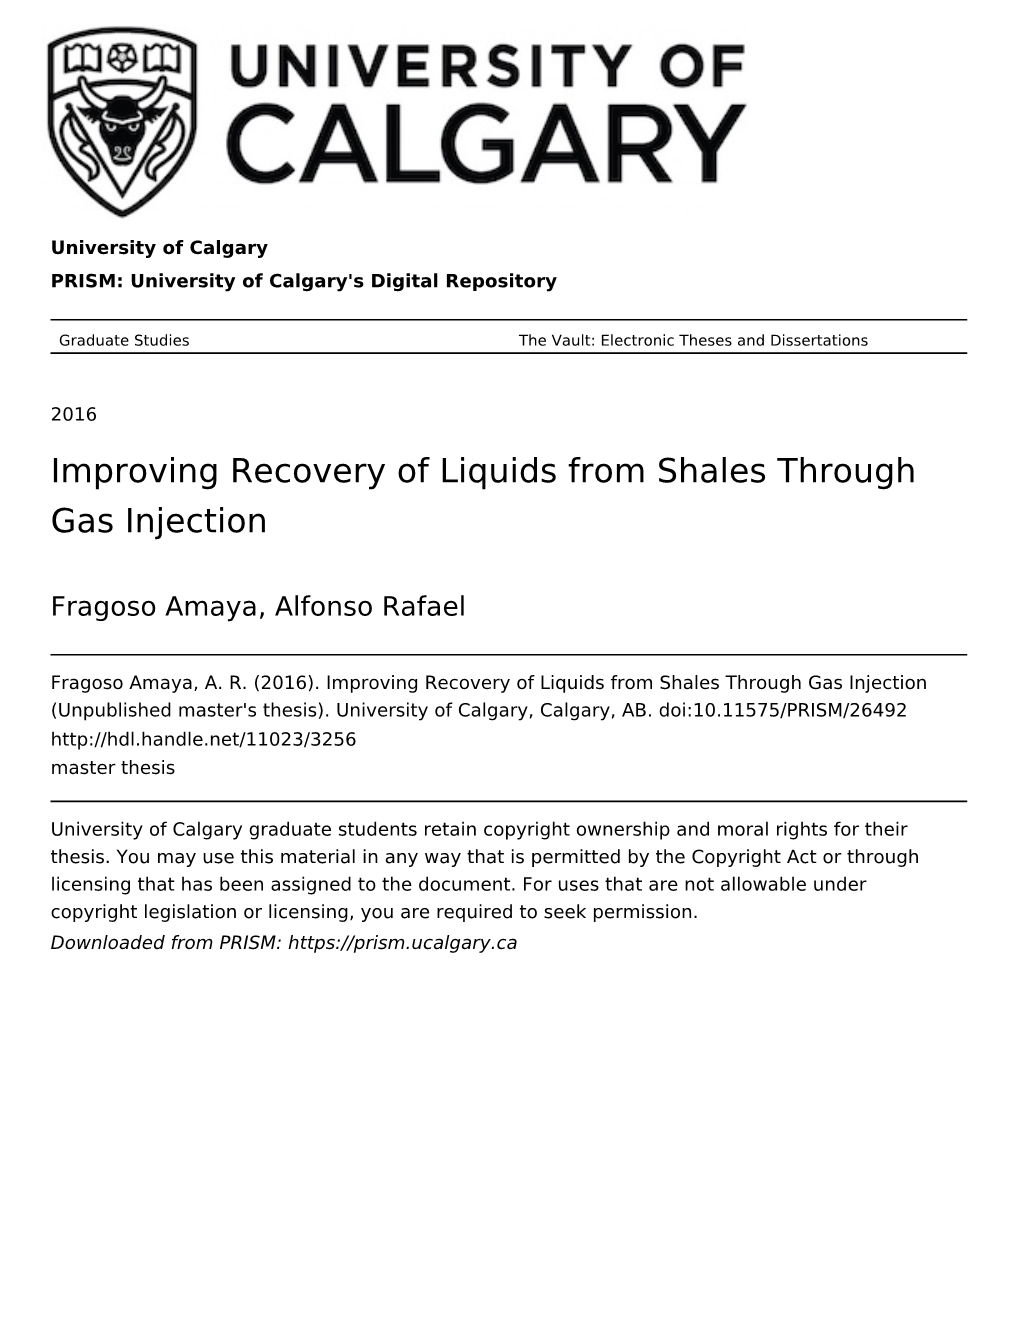 Improving Recovery of Liquids from Shales Through Gas Injection